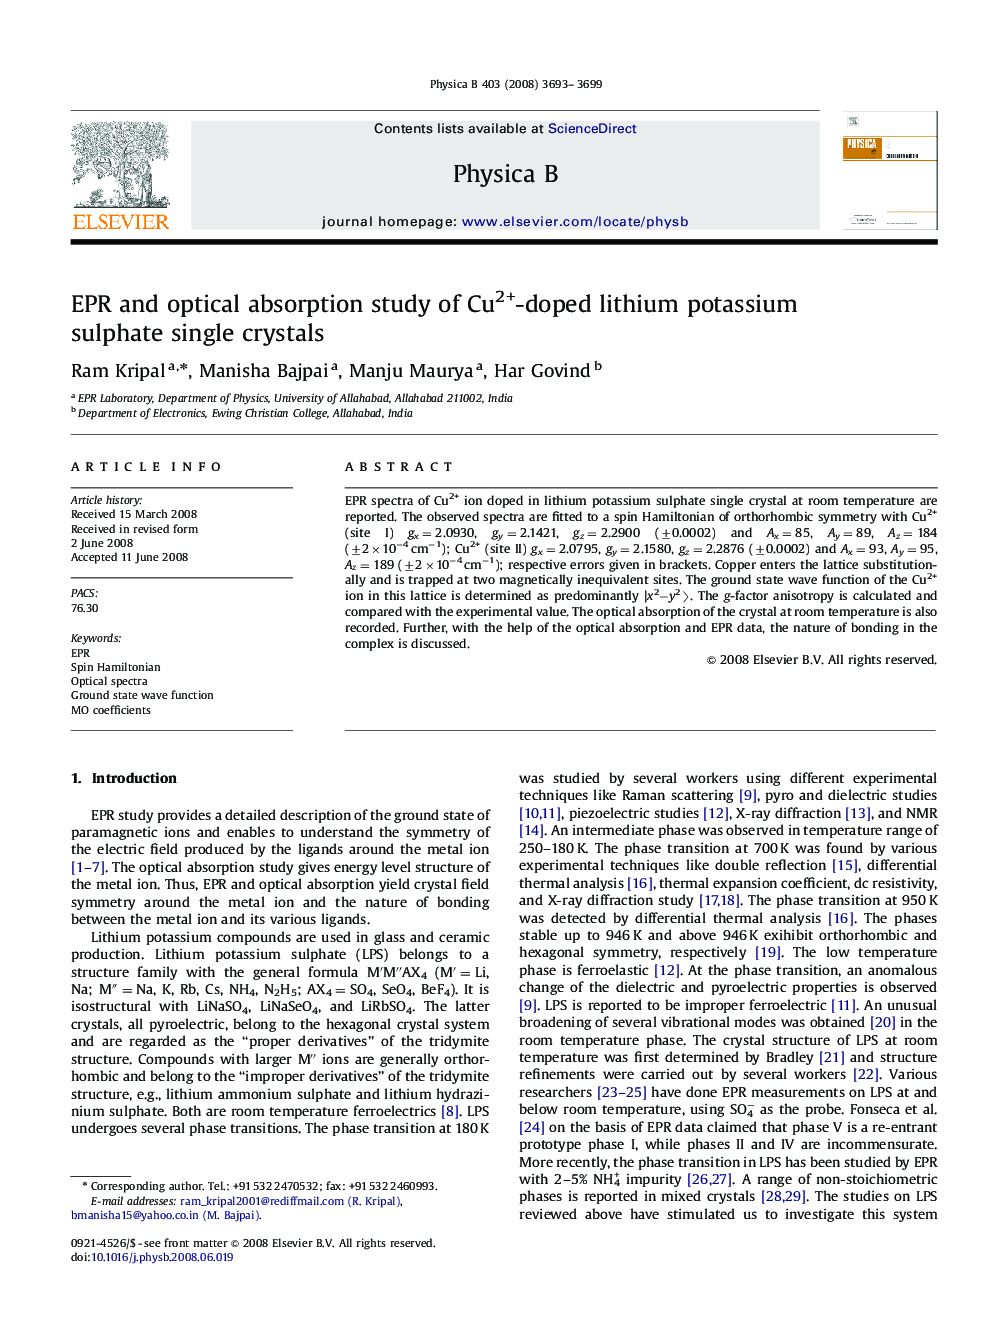 EPR and optical absorption study of Cu2+-doped lithium potassium sulphate single crystals